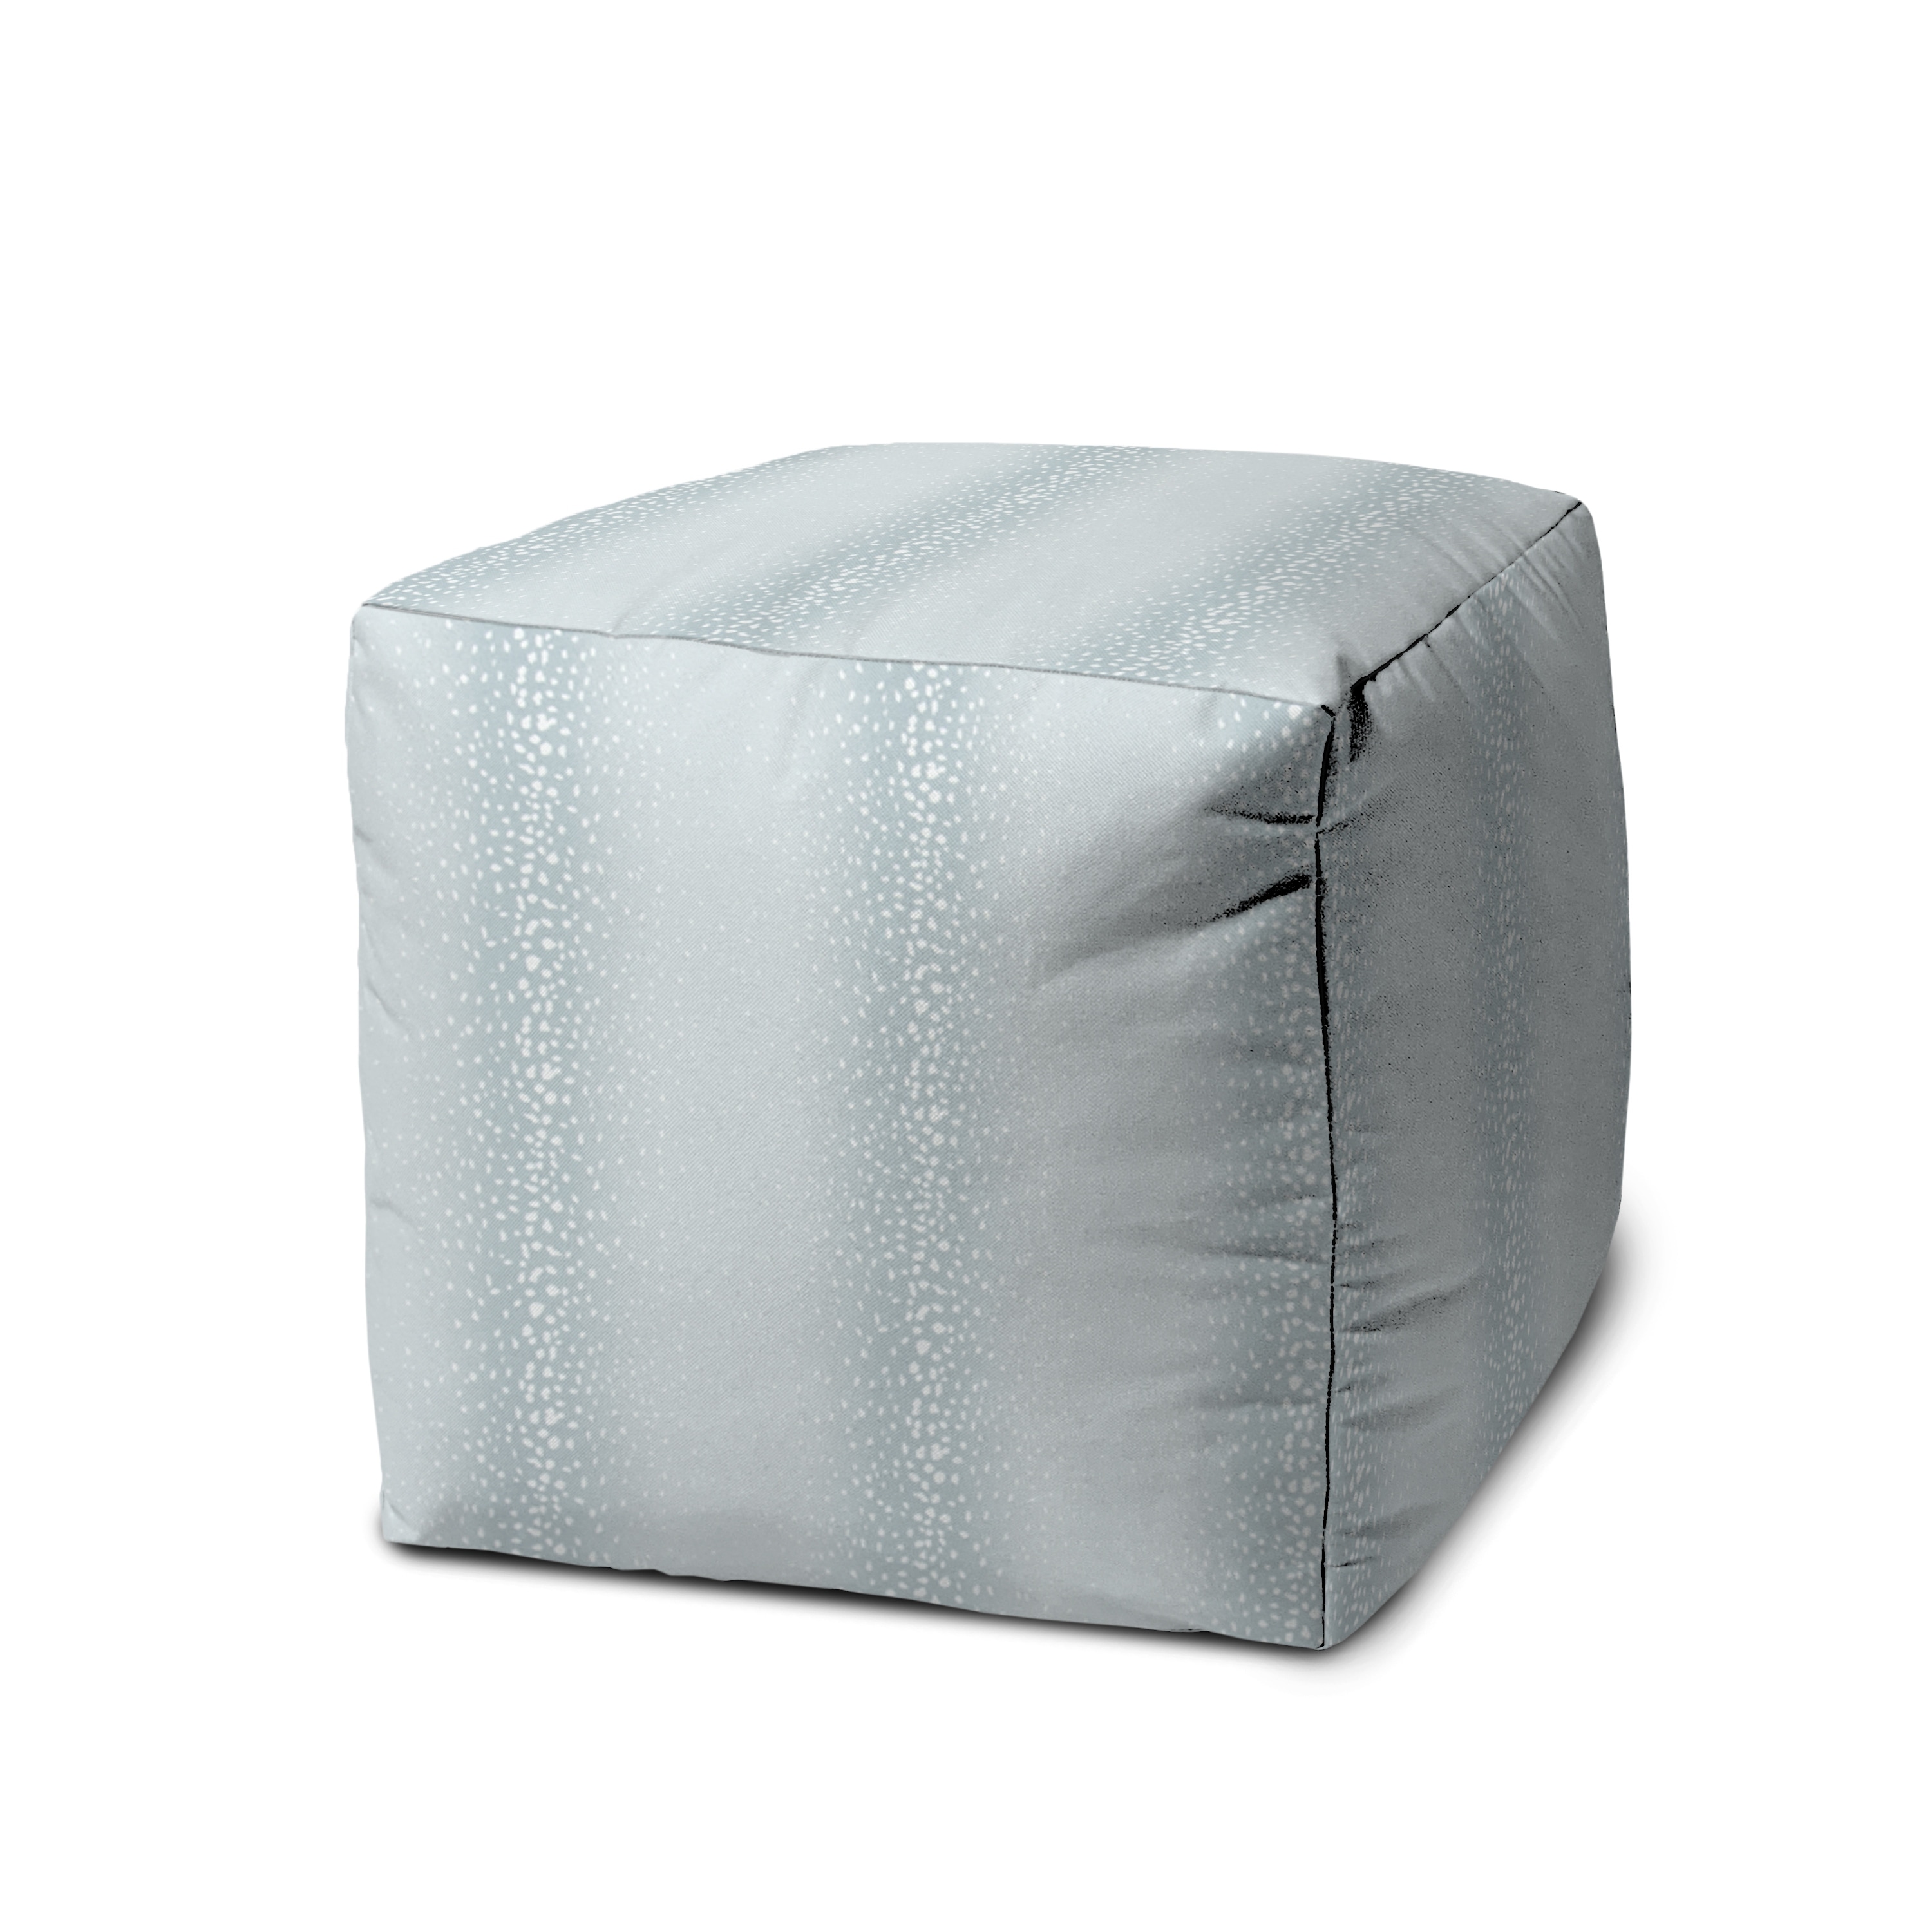 Joita Indoor Outdoor Pouf LEOPER Zipper Cover with Luxury Polyfil Stuffing  17 x 17 x 17 - Bed Bath & Beyond - 35631564